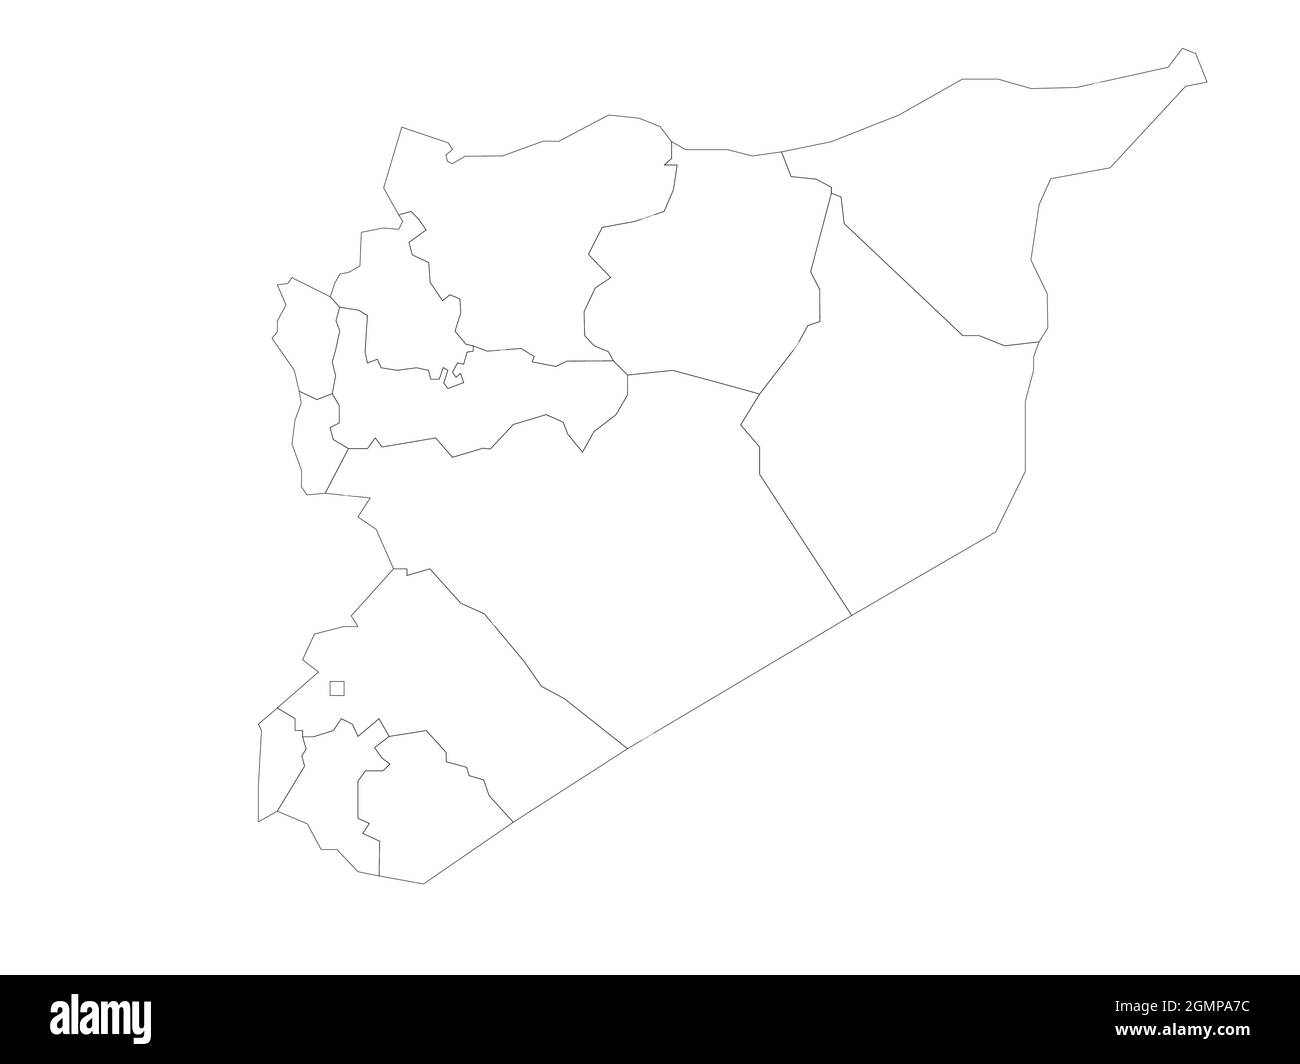 Political map of Syria. Administrative divisions - governorates. Simple flat blank vector map Stock Vector